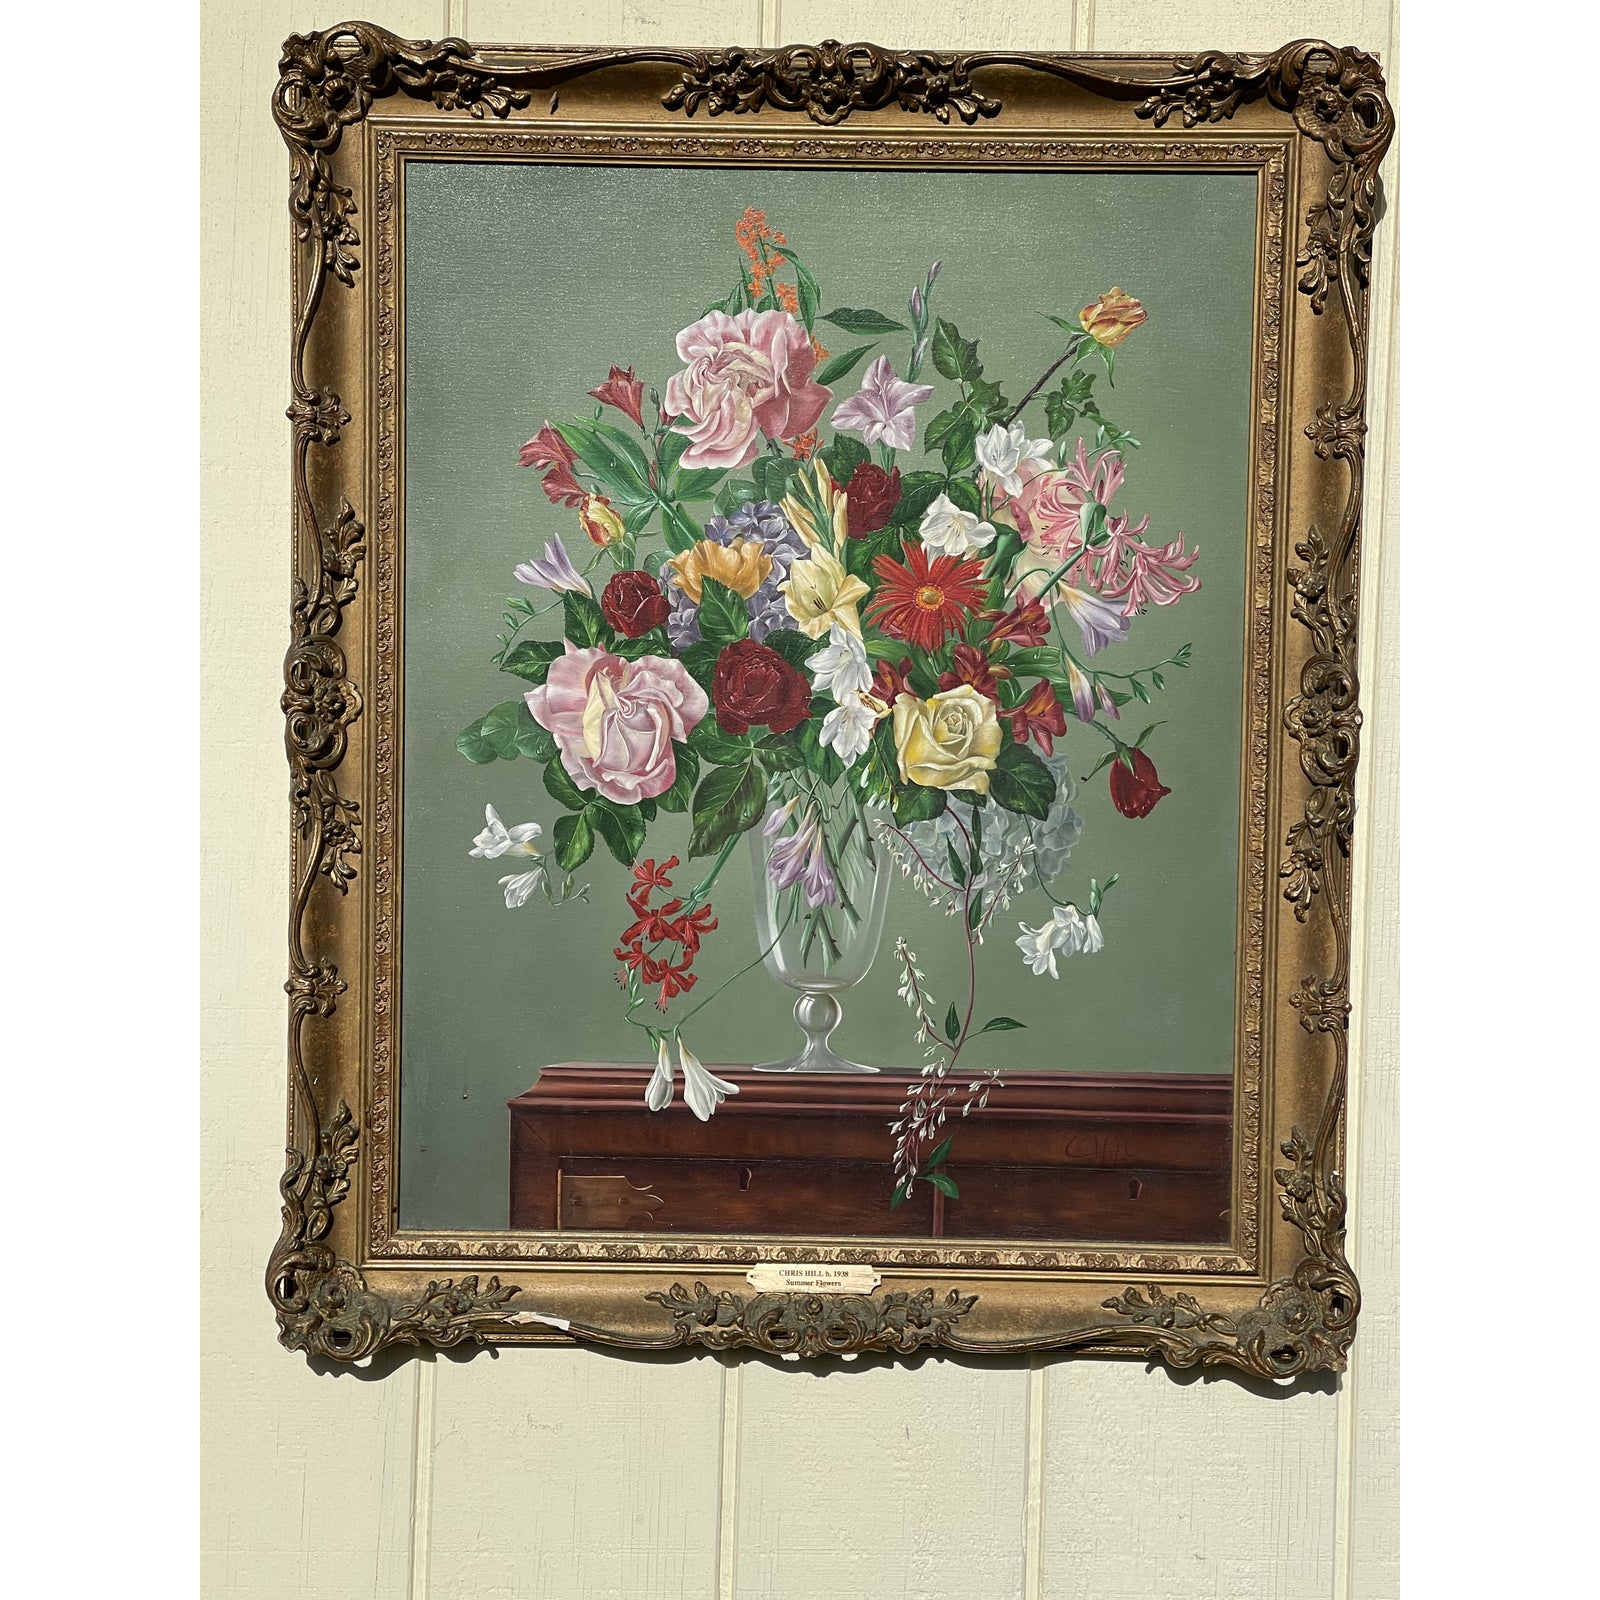 late-20th-century-summer-flowers-botanical-still-life-painting-by-chris-hill-framed-7216